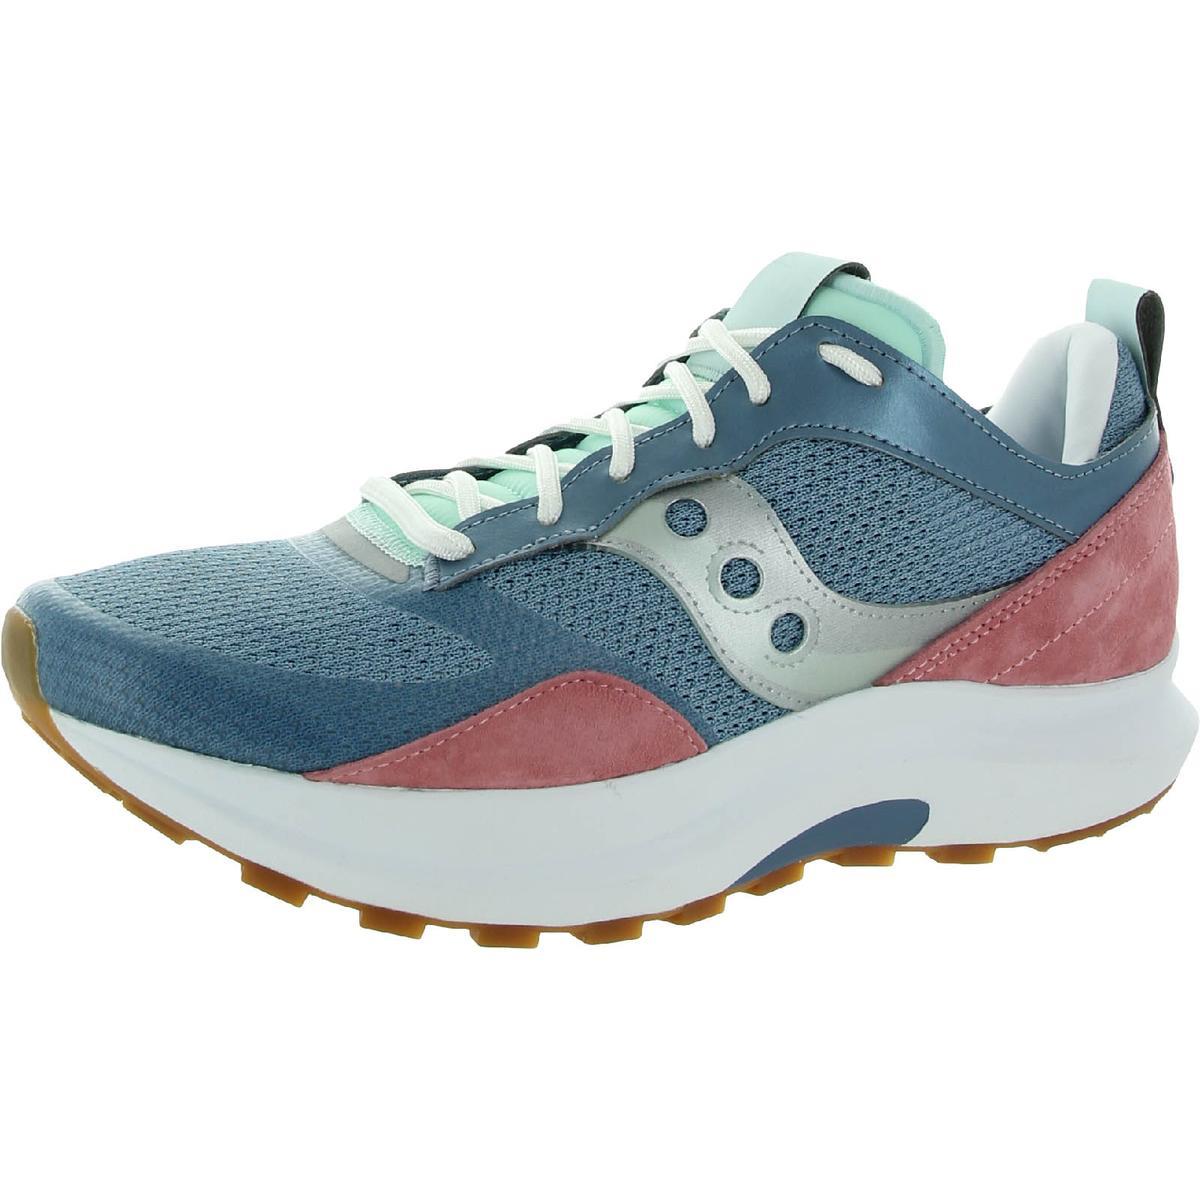 Saucony Men`s Jazz Hybrid Leather Lace-up Athletic Fashion Sneakers Blue/Rose